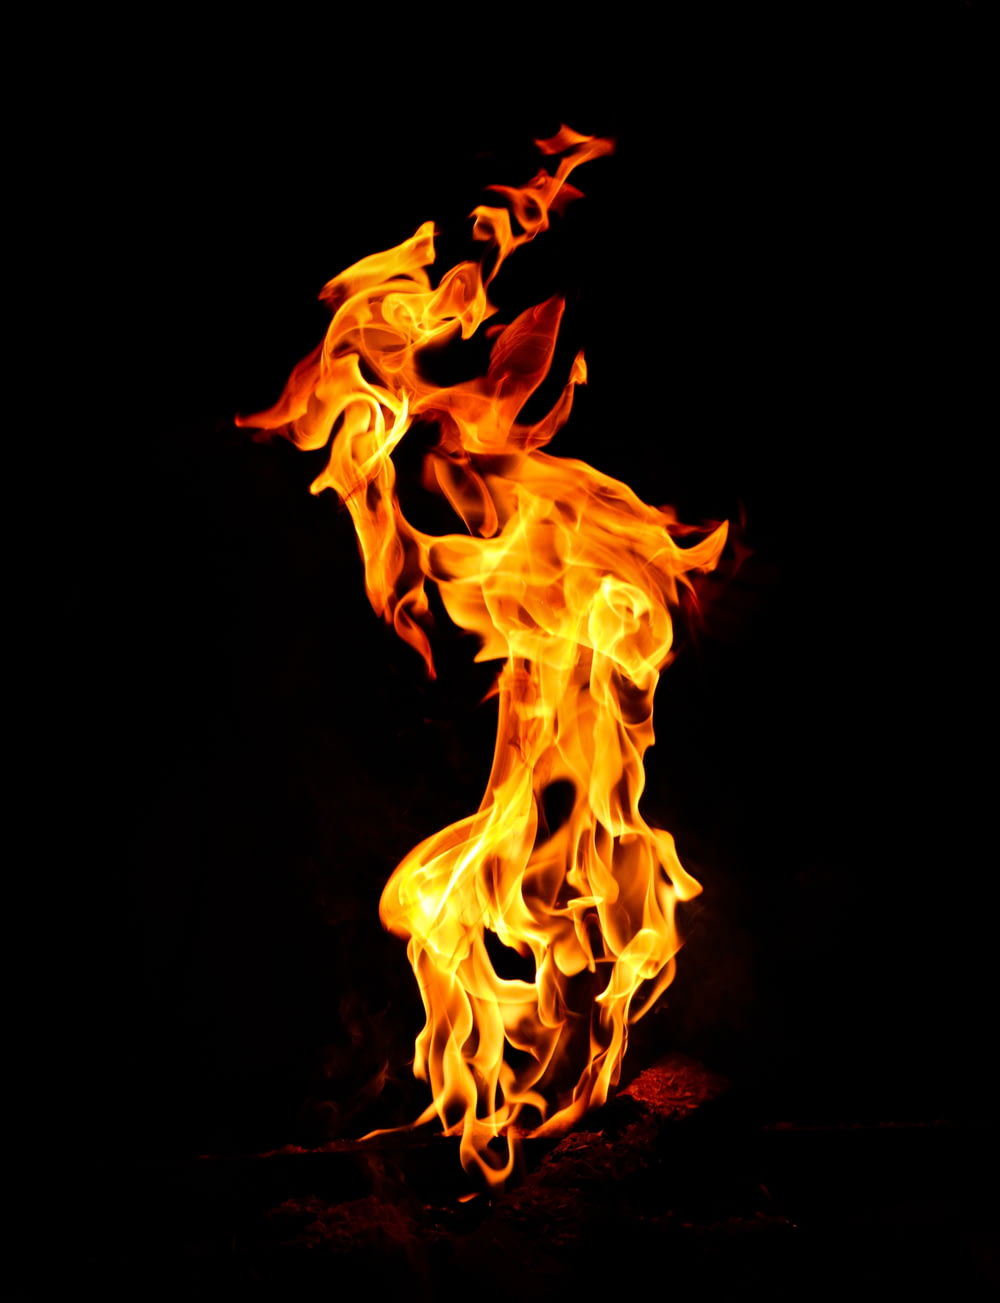 a fire flame is shown in the dark